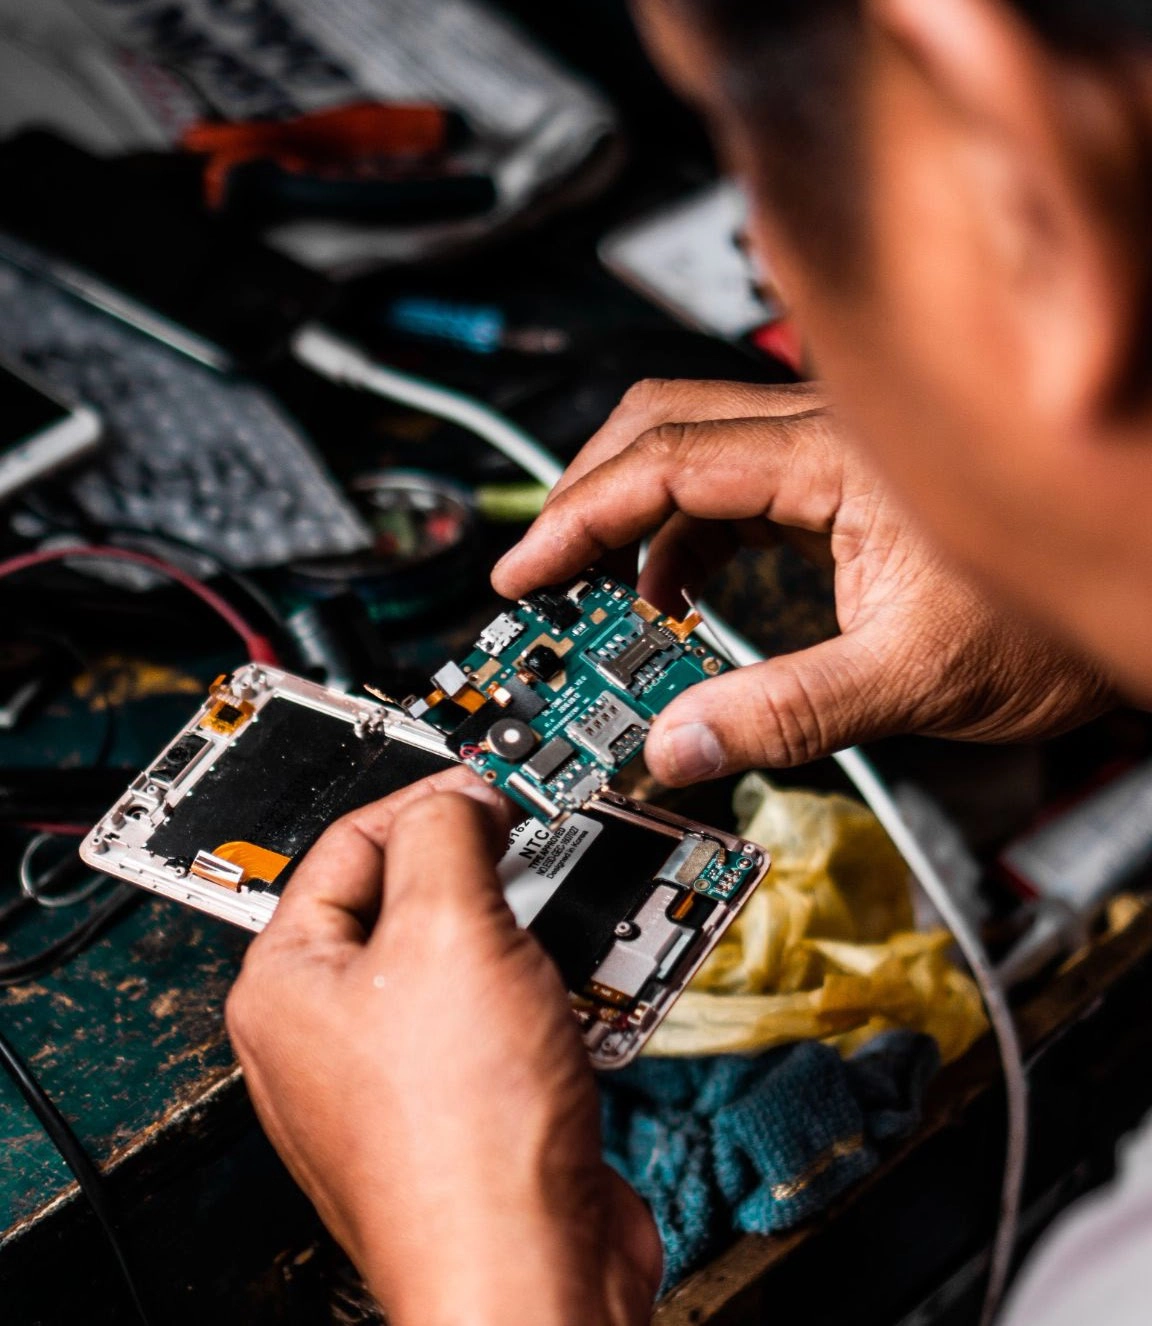 Technician holding a an open smartphone repairing the motherboard